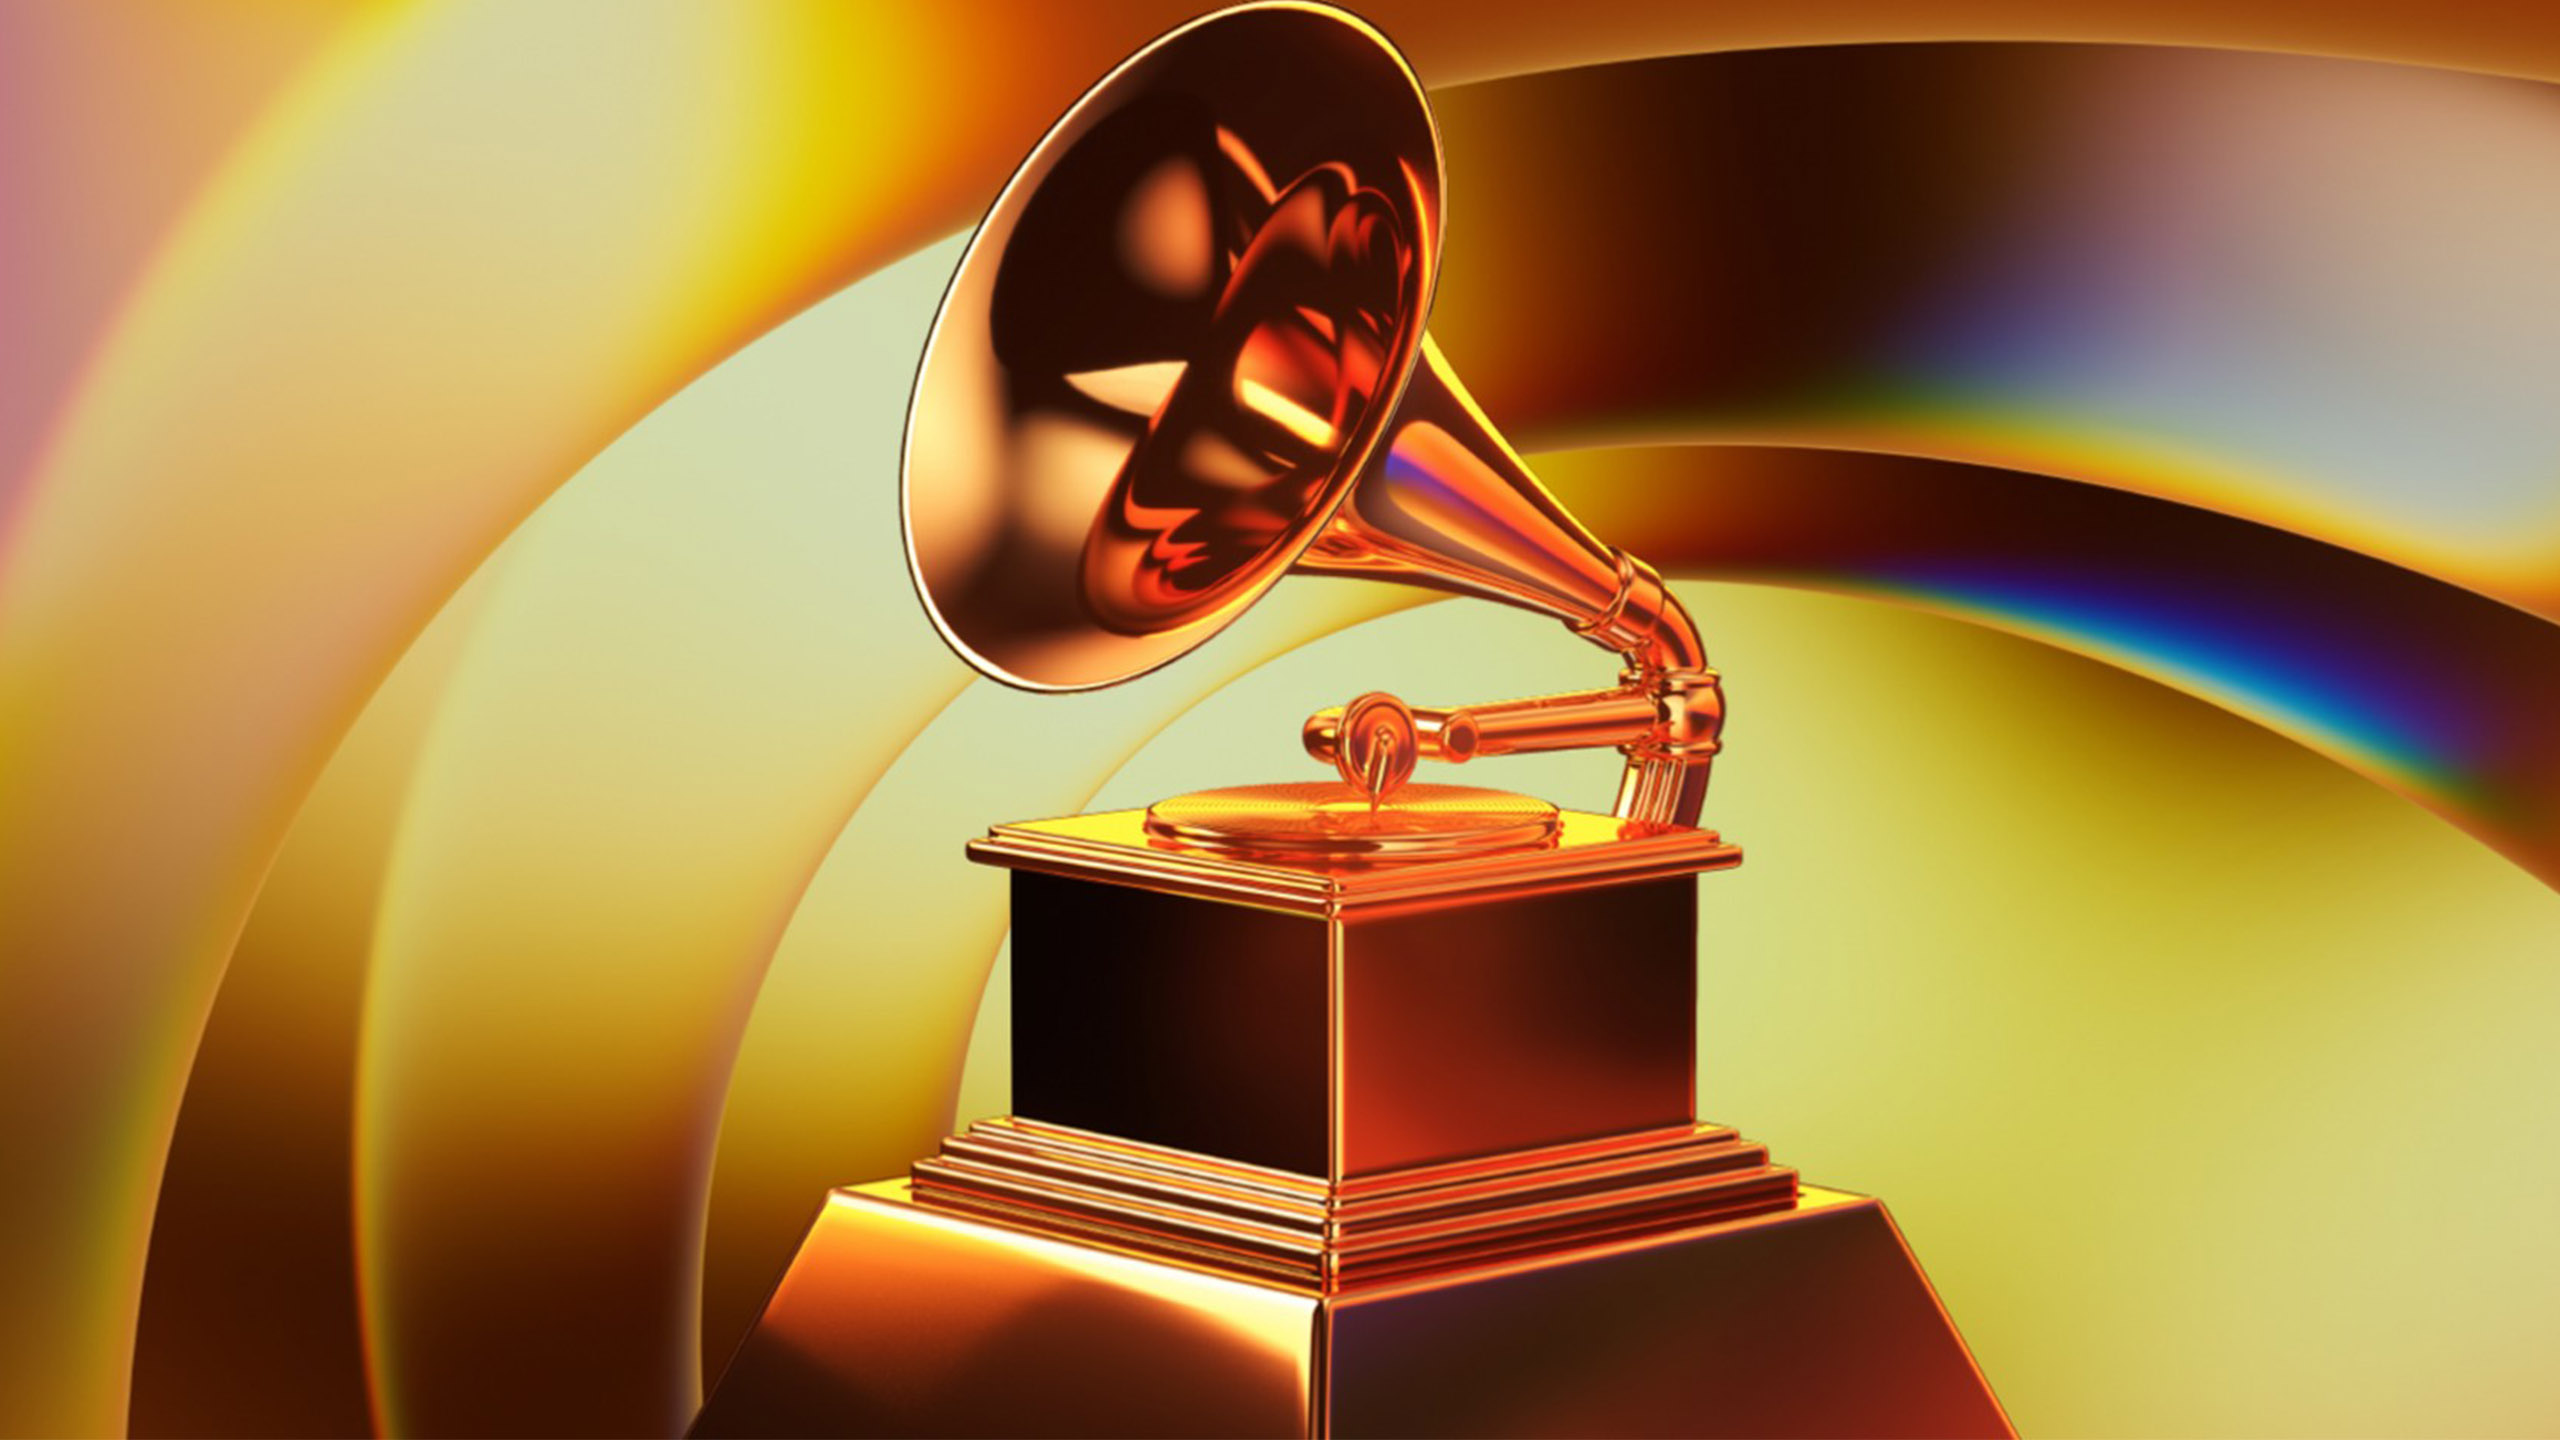 The 66th Annual GRAMMY Awards® Set to Take Place Sun, Feb. 4, 2024